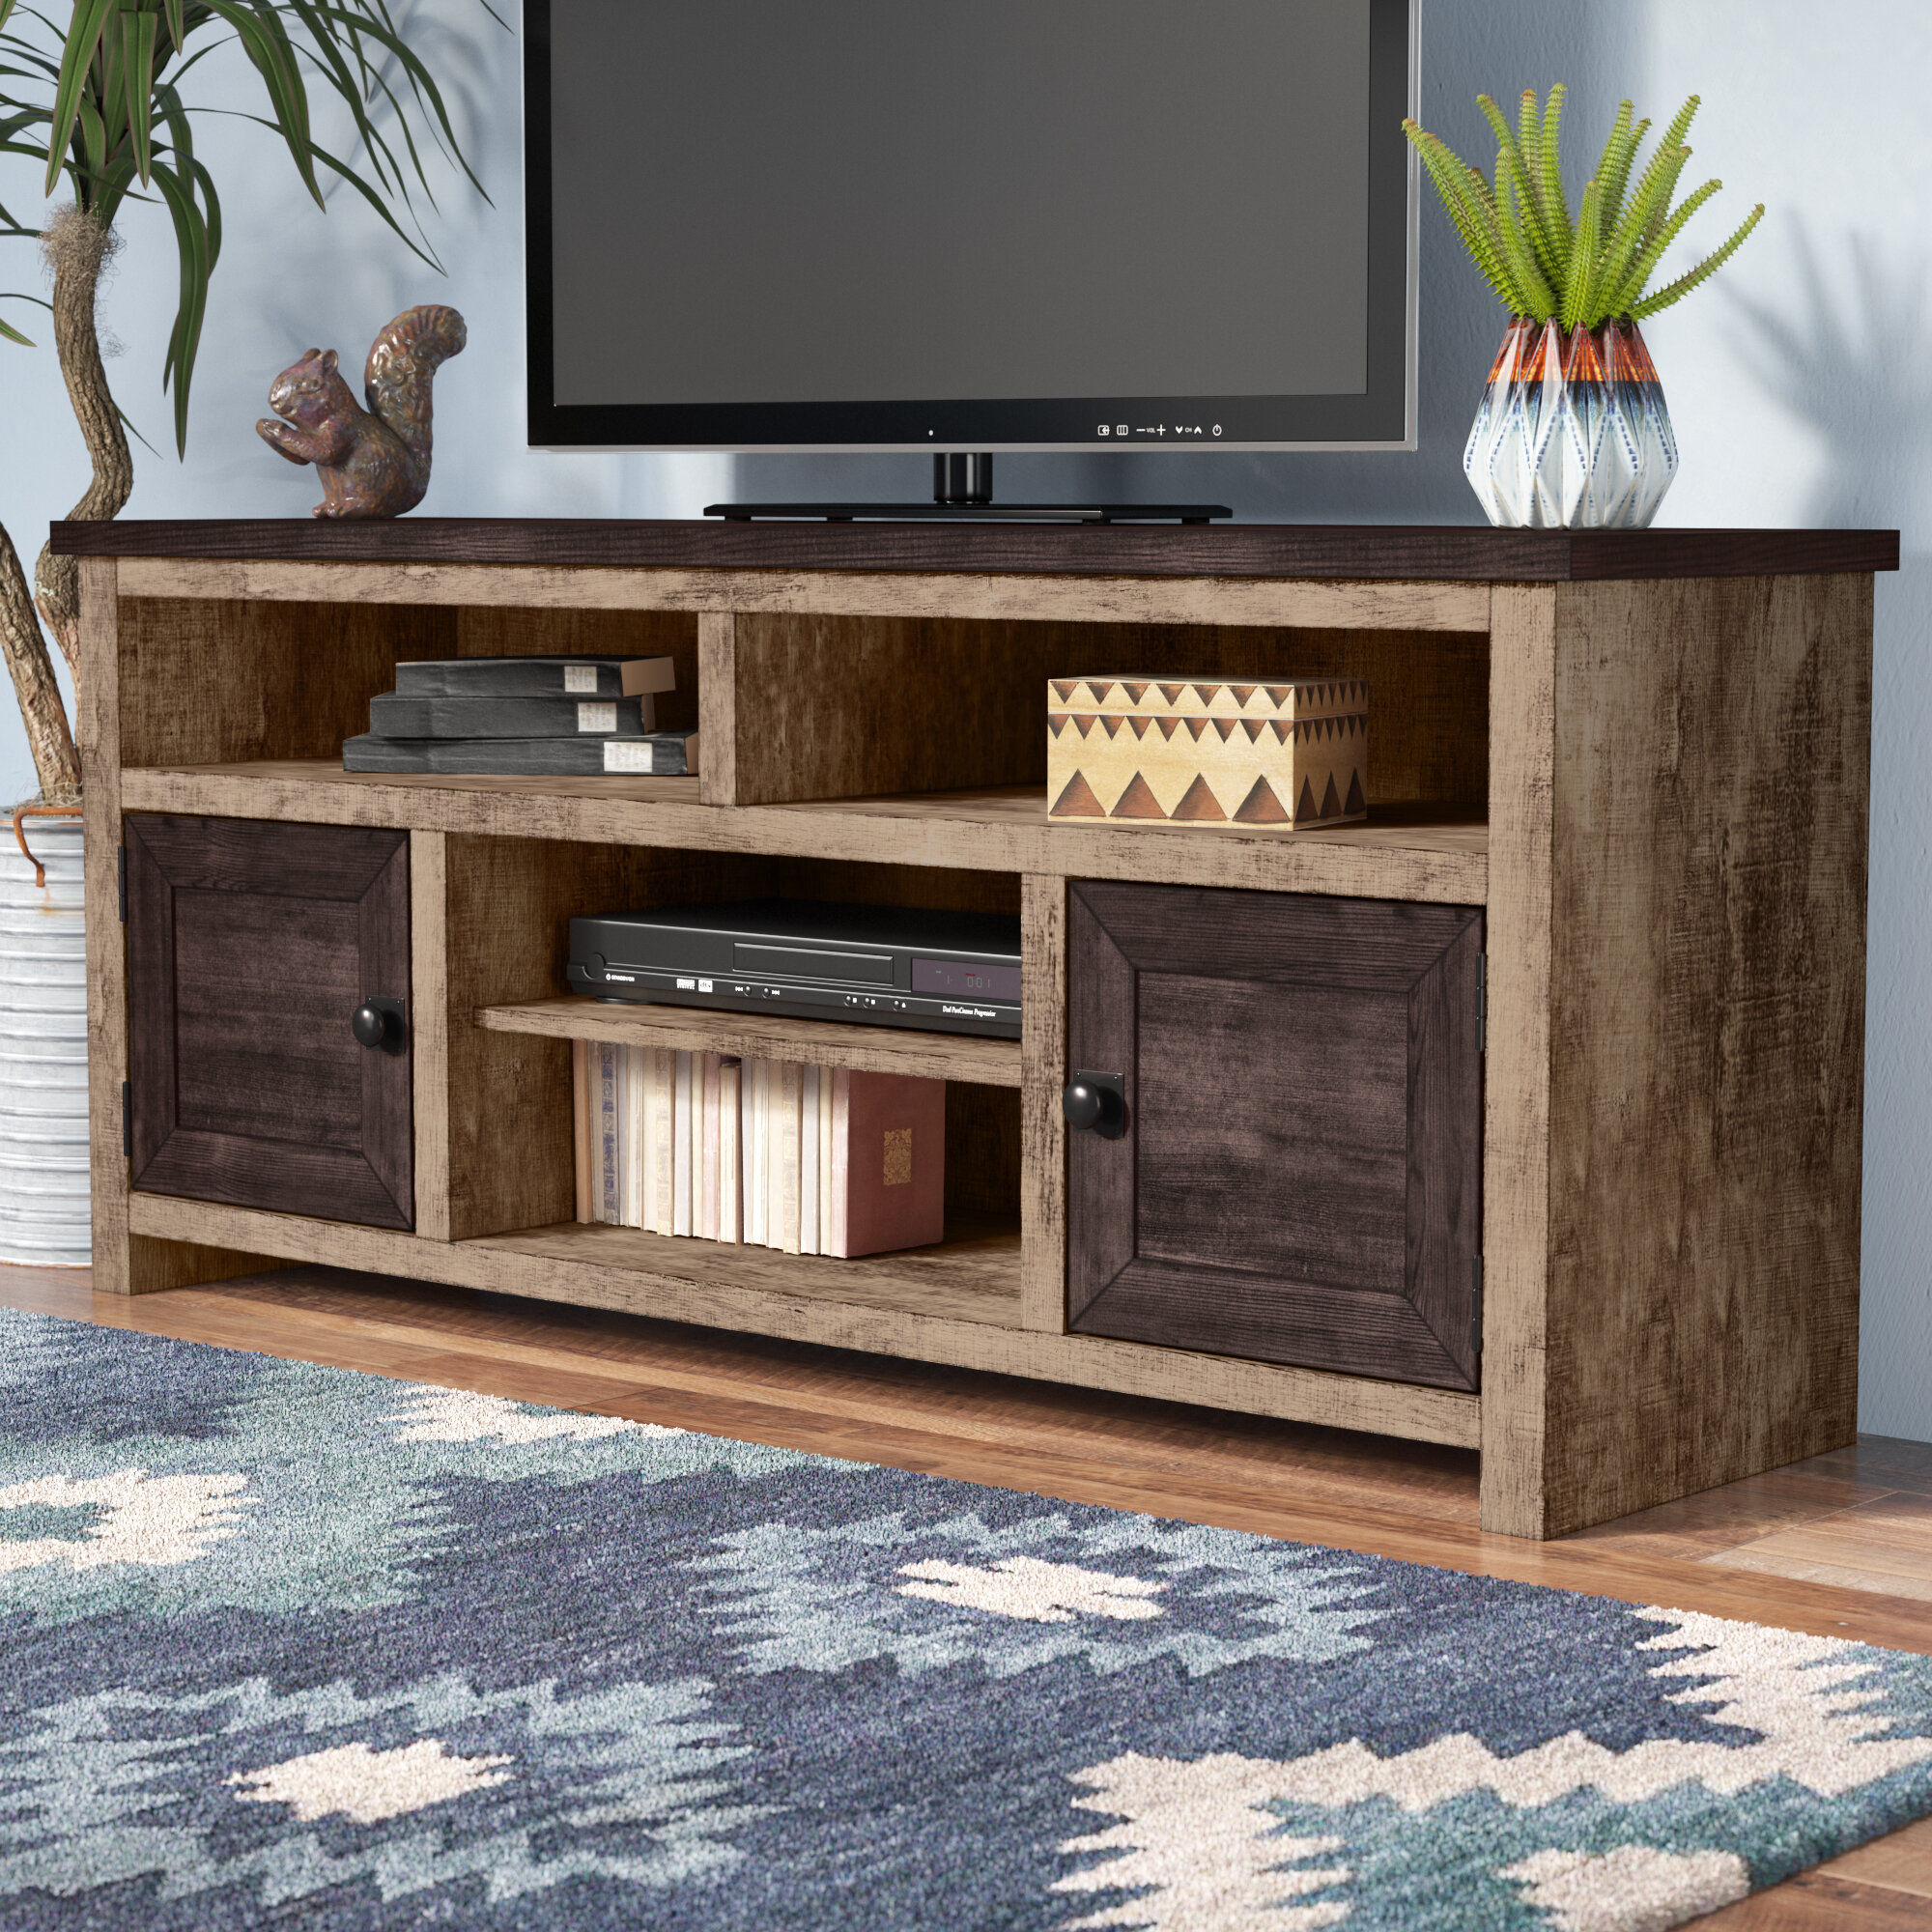 Union Rustic Woodsburgh Tv Stand For Tvs Up To 65 Inches Reviews Wayfair